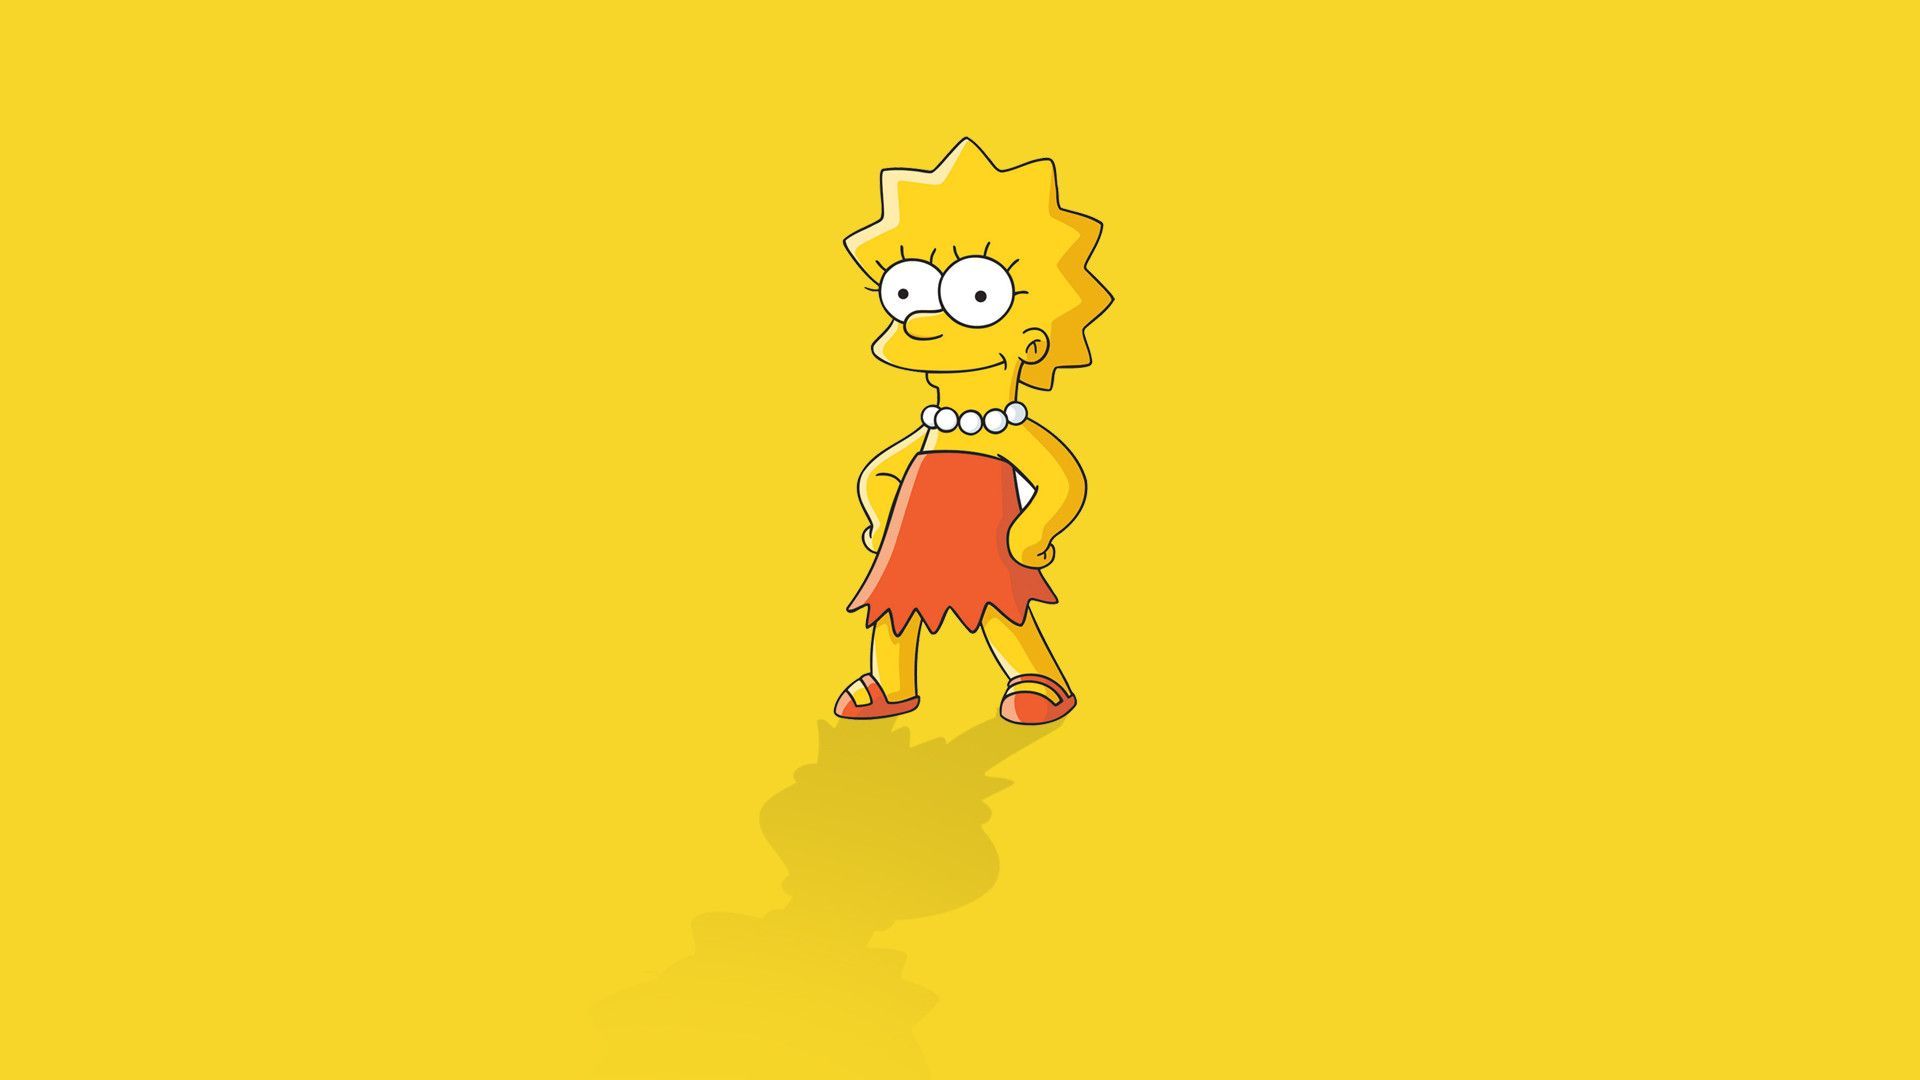 The simpsons wallpaper for your desktop - The Simpsons